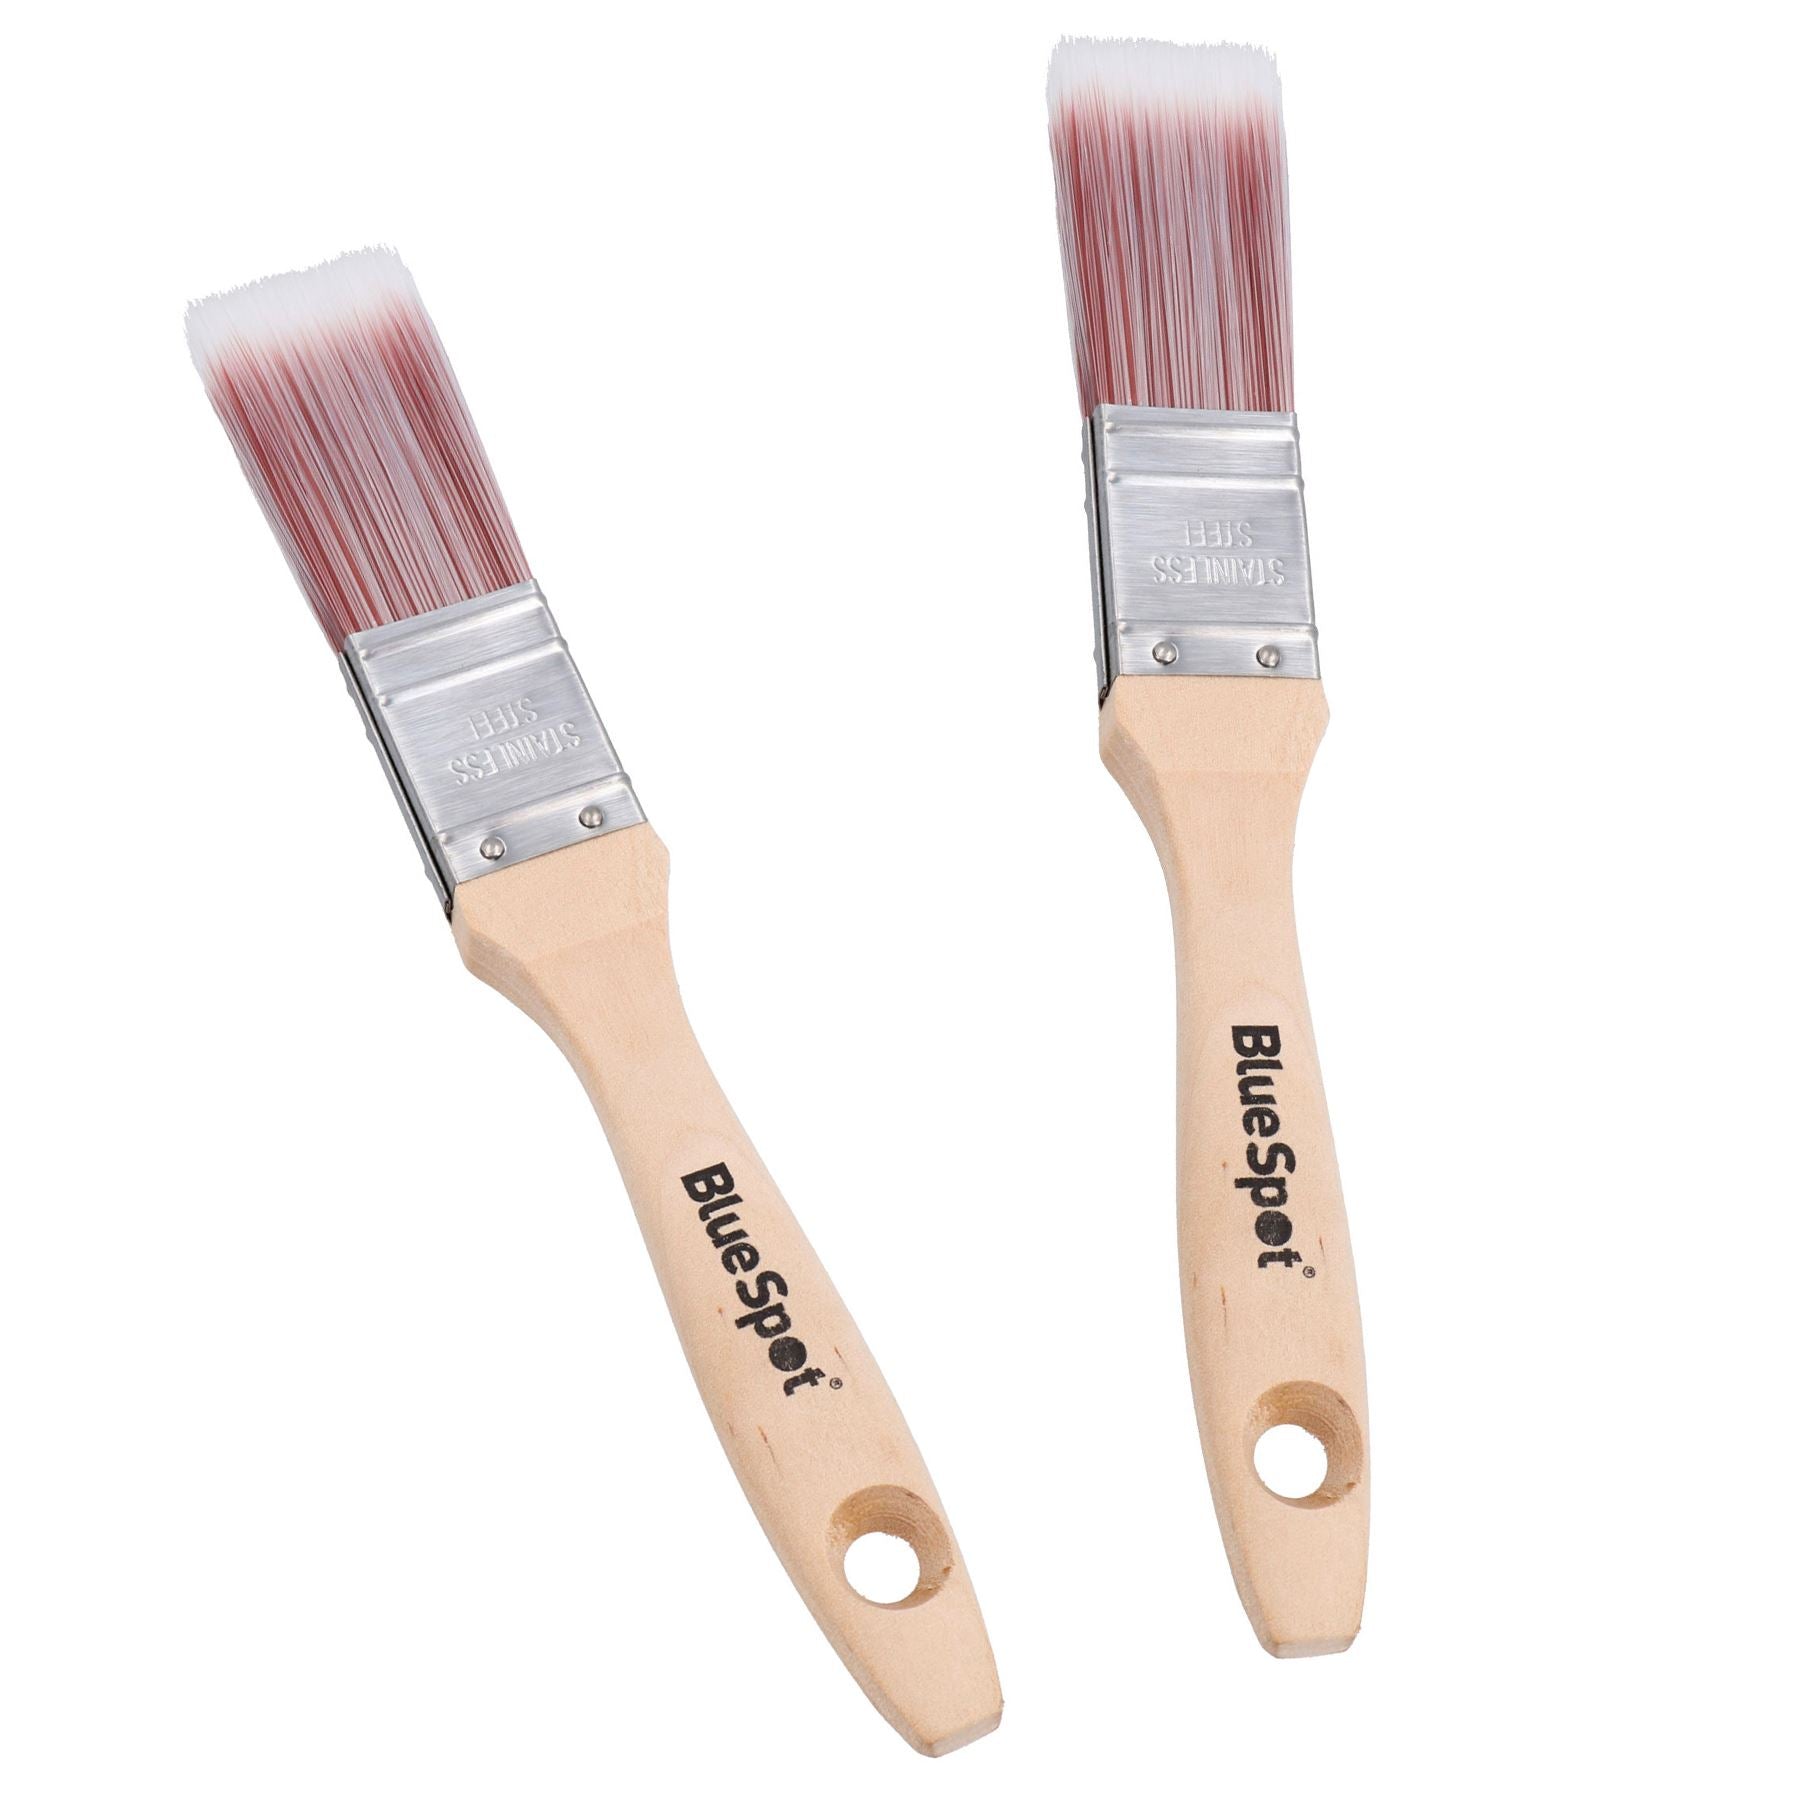 1” (25mm) Synthetic Paint Brush Painting + Decorating Brushes With Wooden Handle